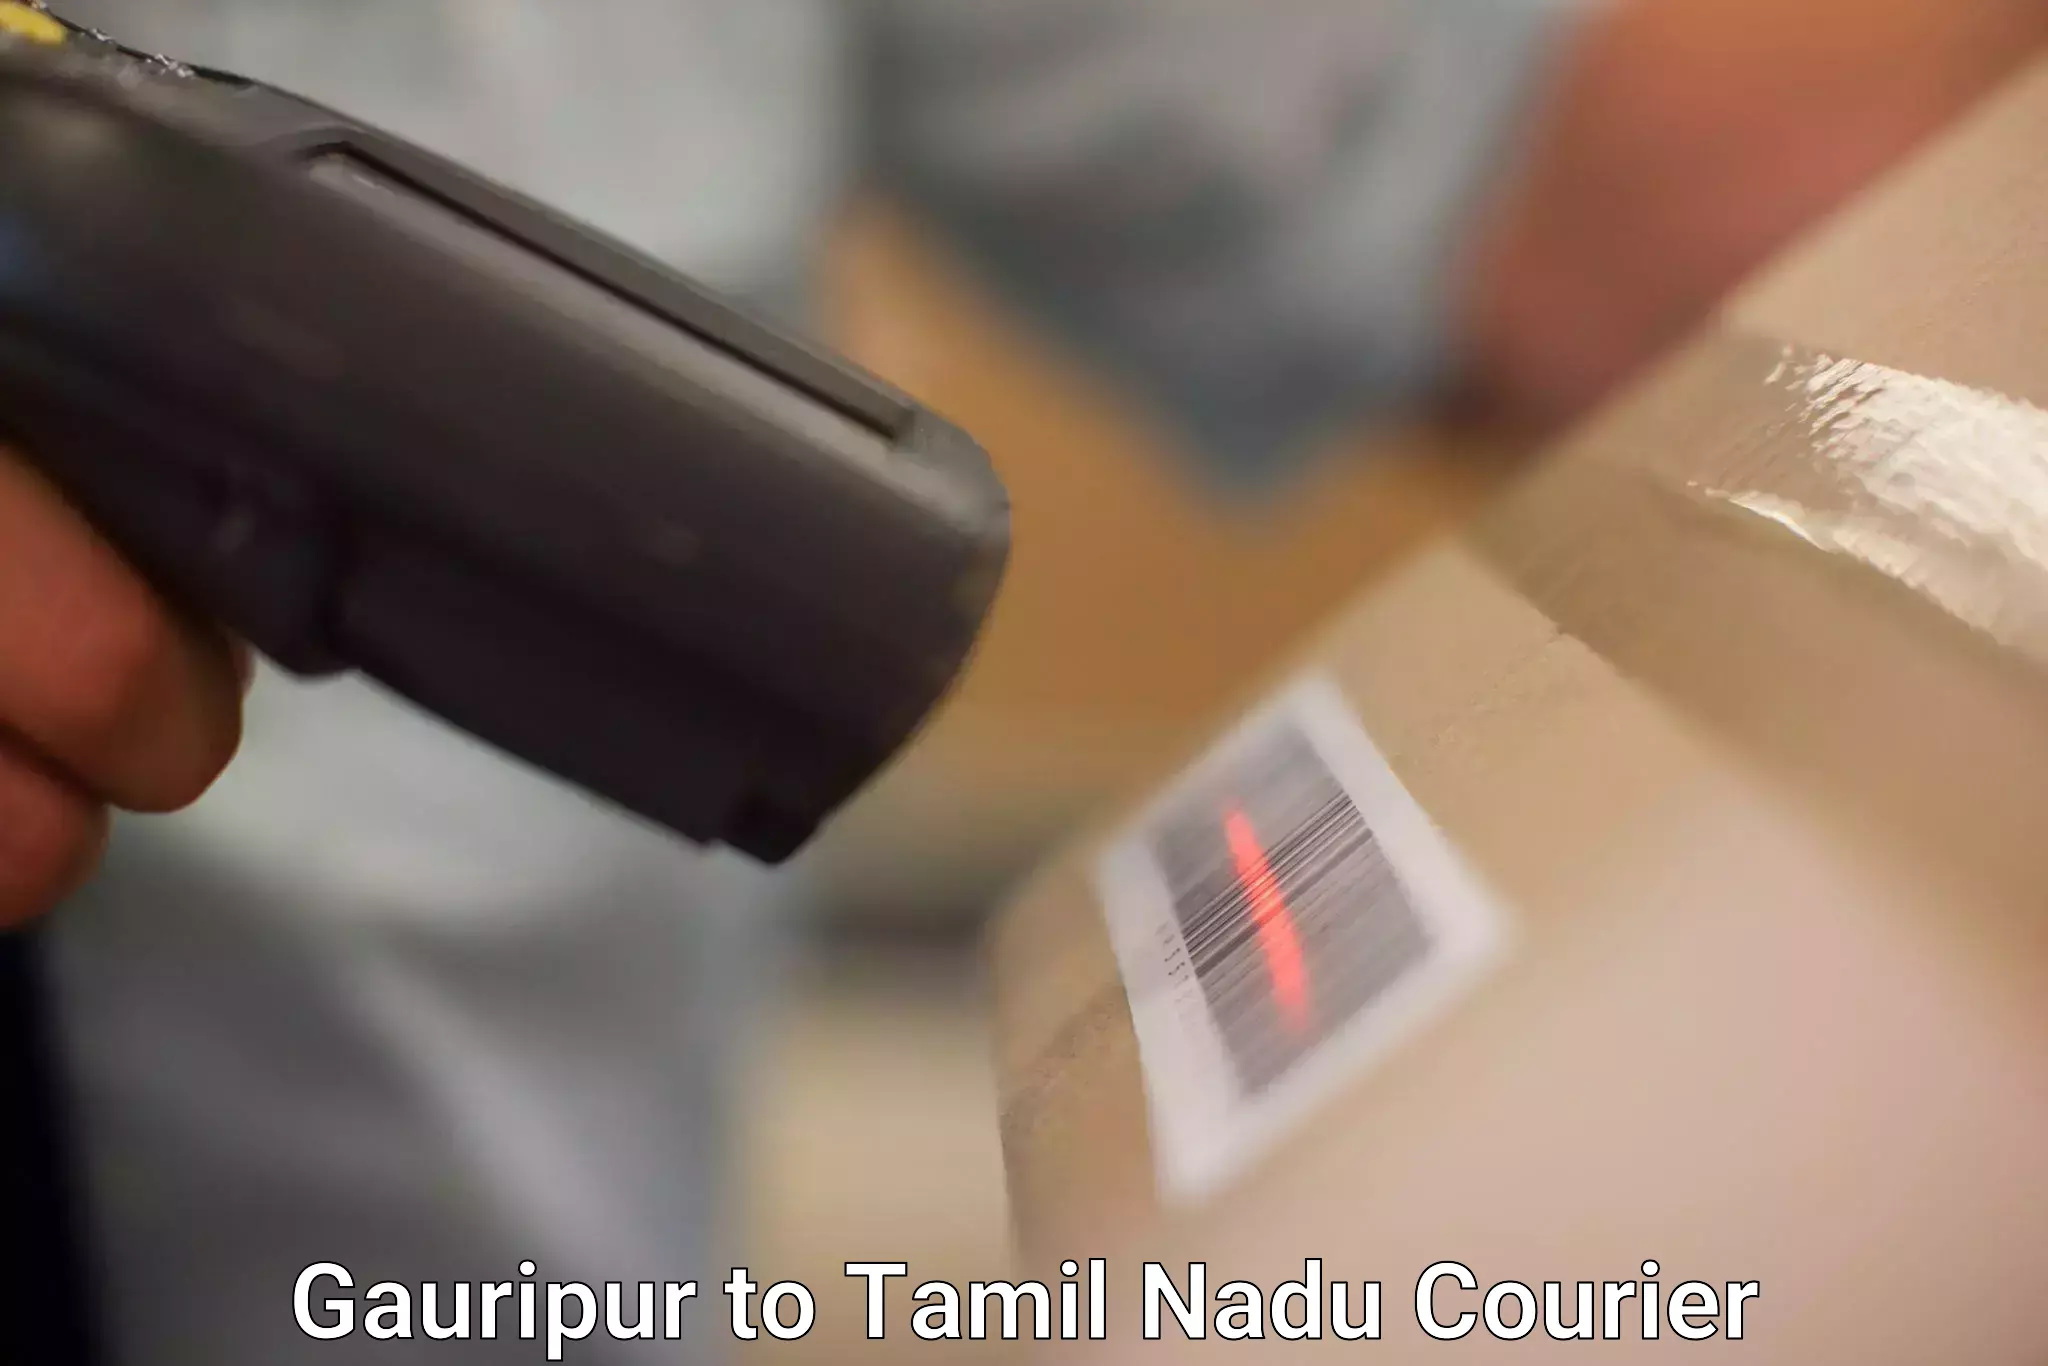 Online shipping calculator Gauripur to Thondi